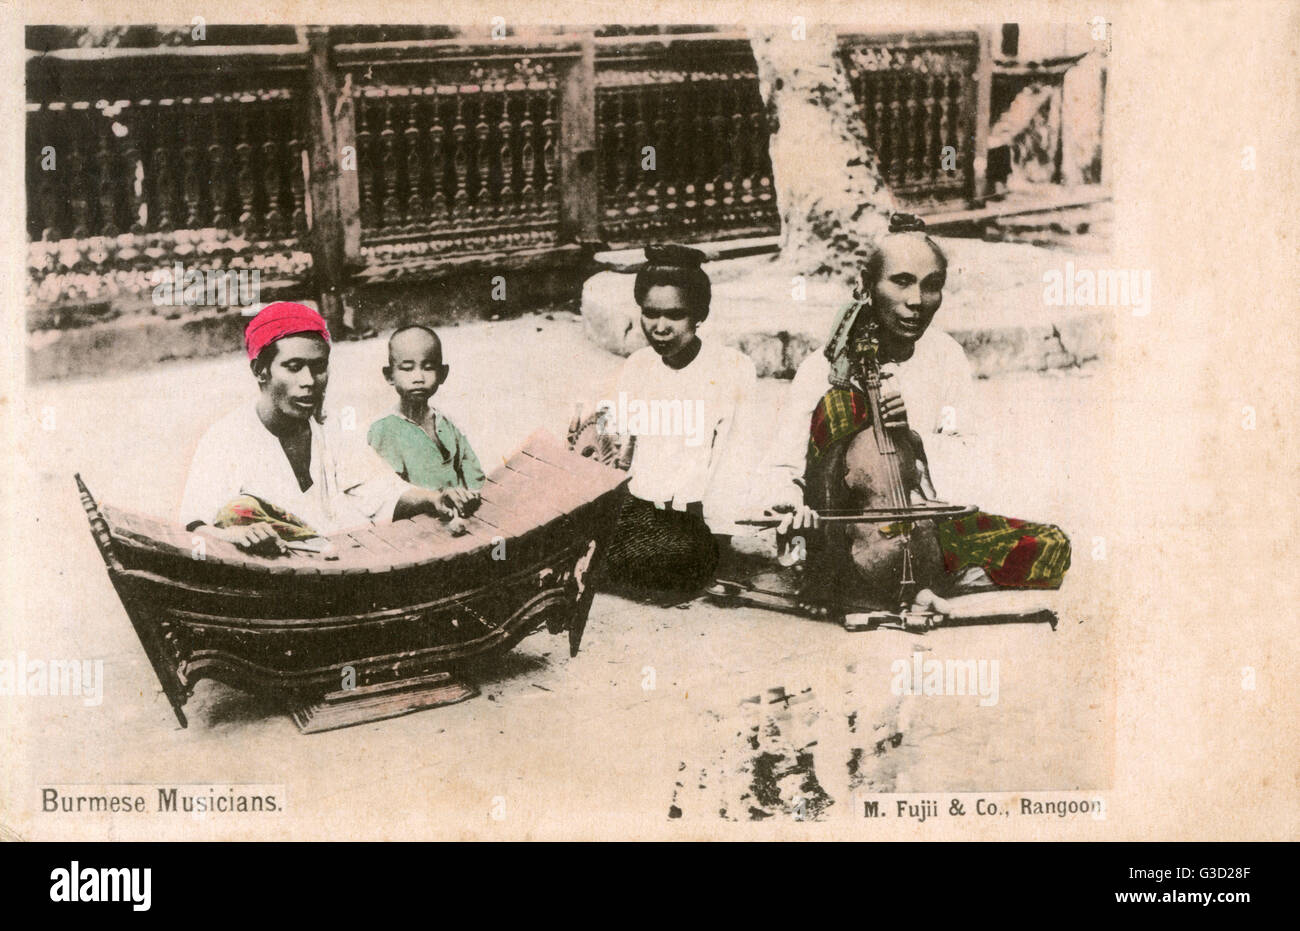 Myanmar - Street Musicians playing a curved Burmese Xylophone or Pattala and the Mon violin, a 3-string fiddle with a western-like body played upright.     Date: circa 1906 Stock Photo